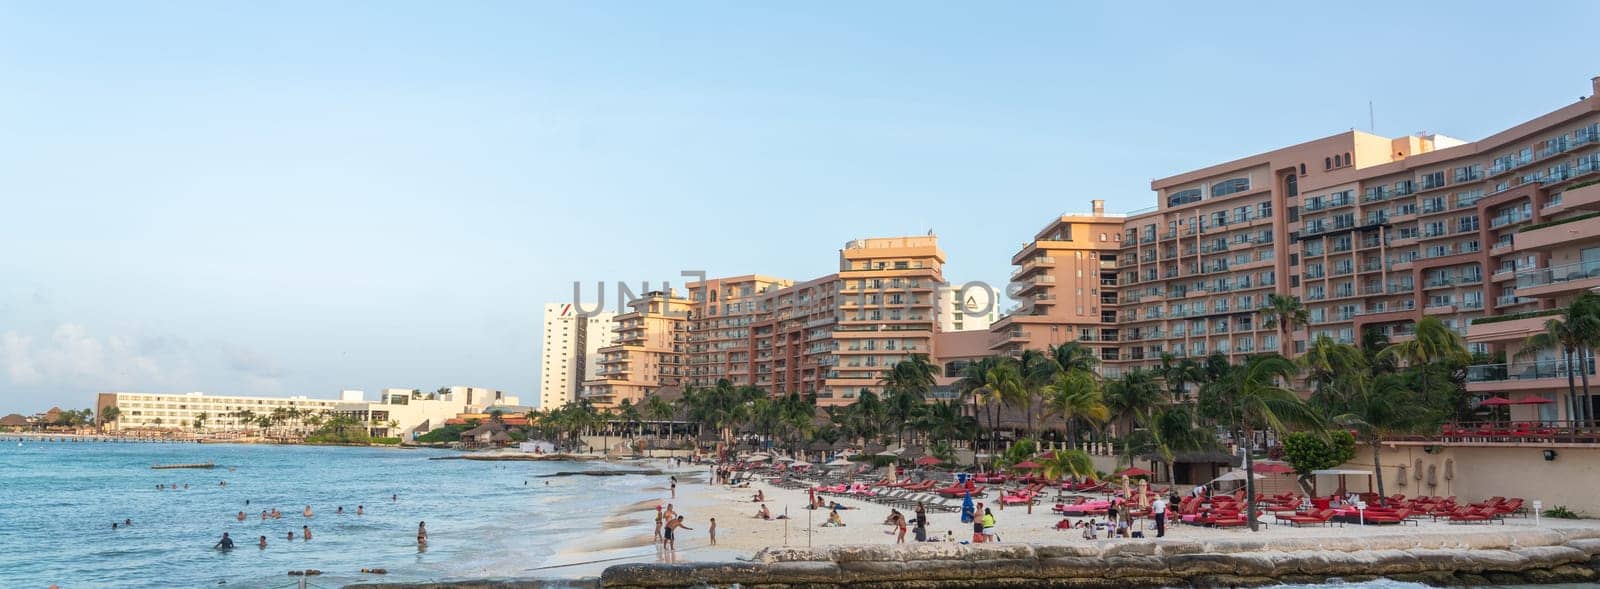 Blurry image of a beach with buildings by the water by Mariakray